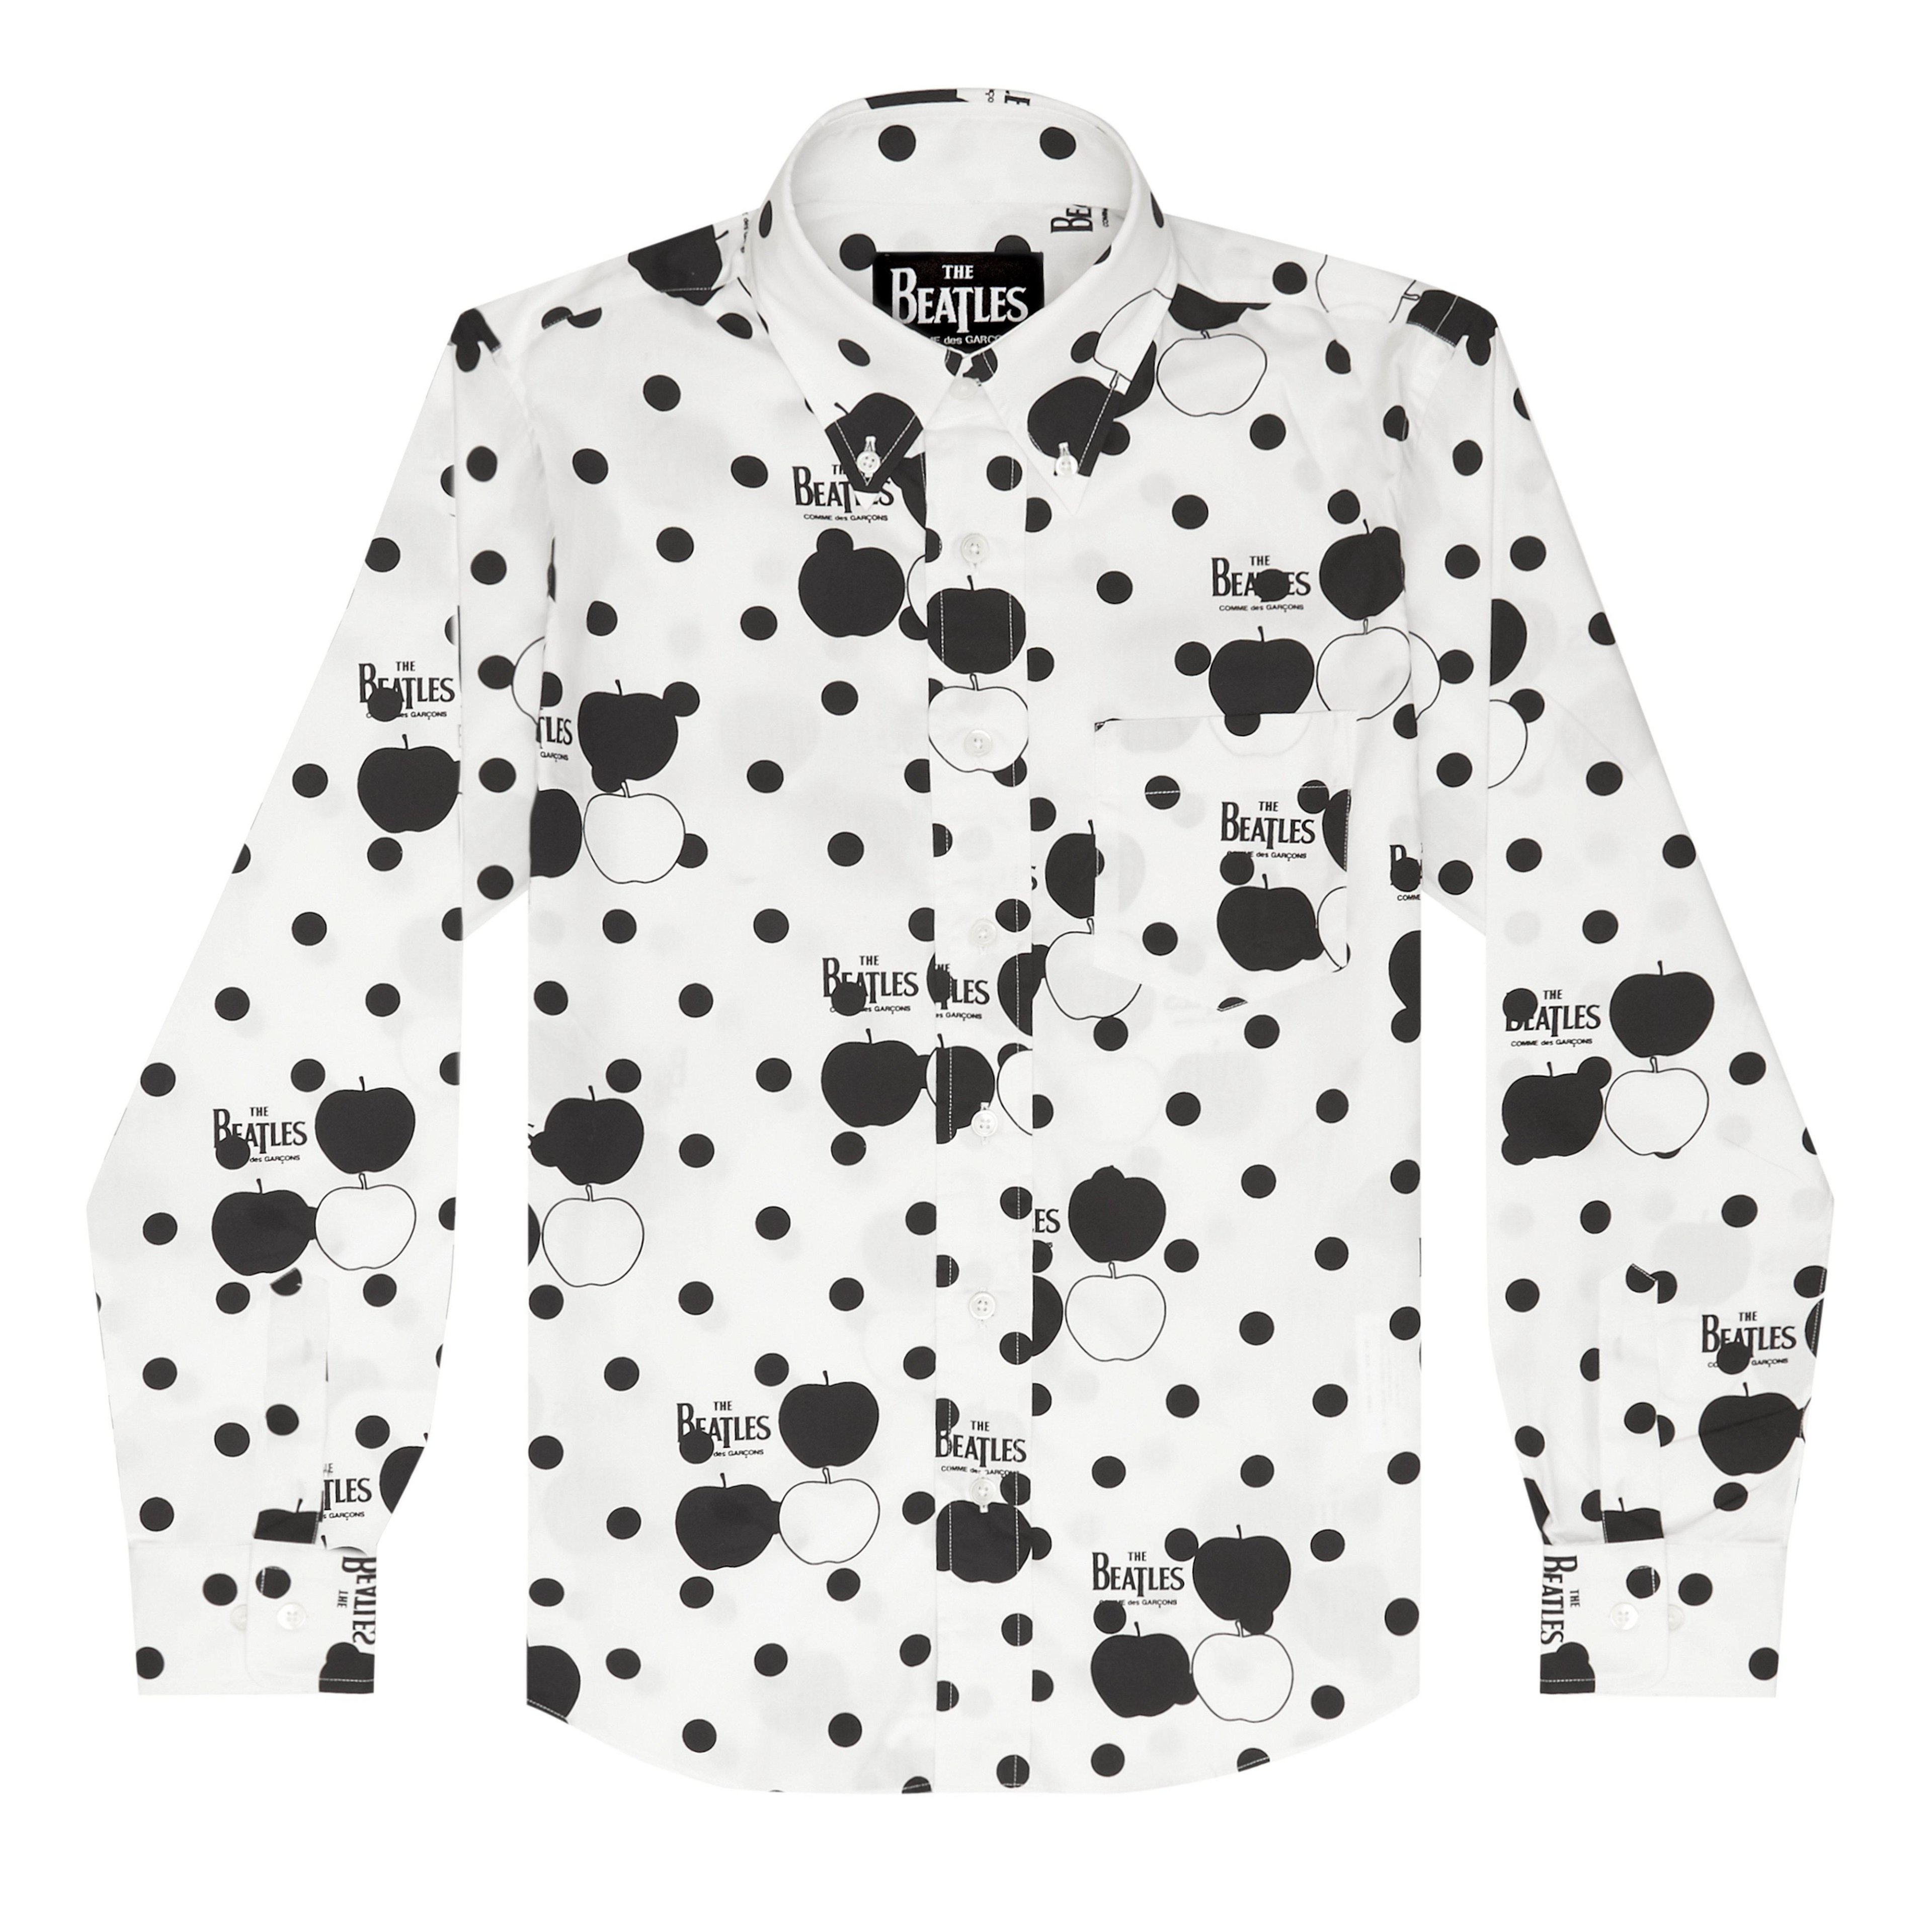 CDG Beatles - Shirt - (White with Black/White Apples) by COMME DES GARCONS